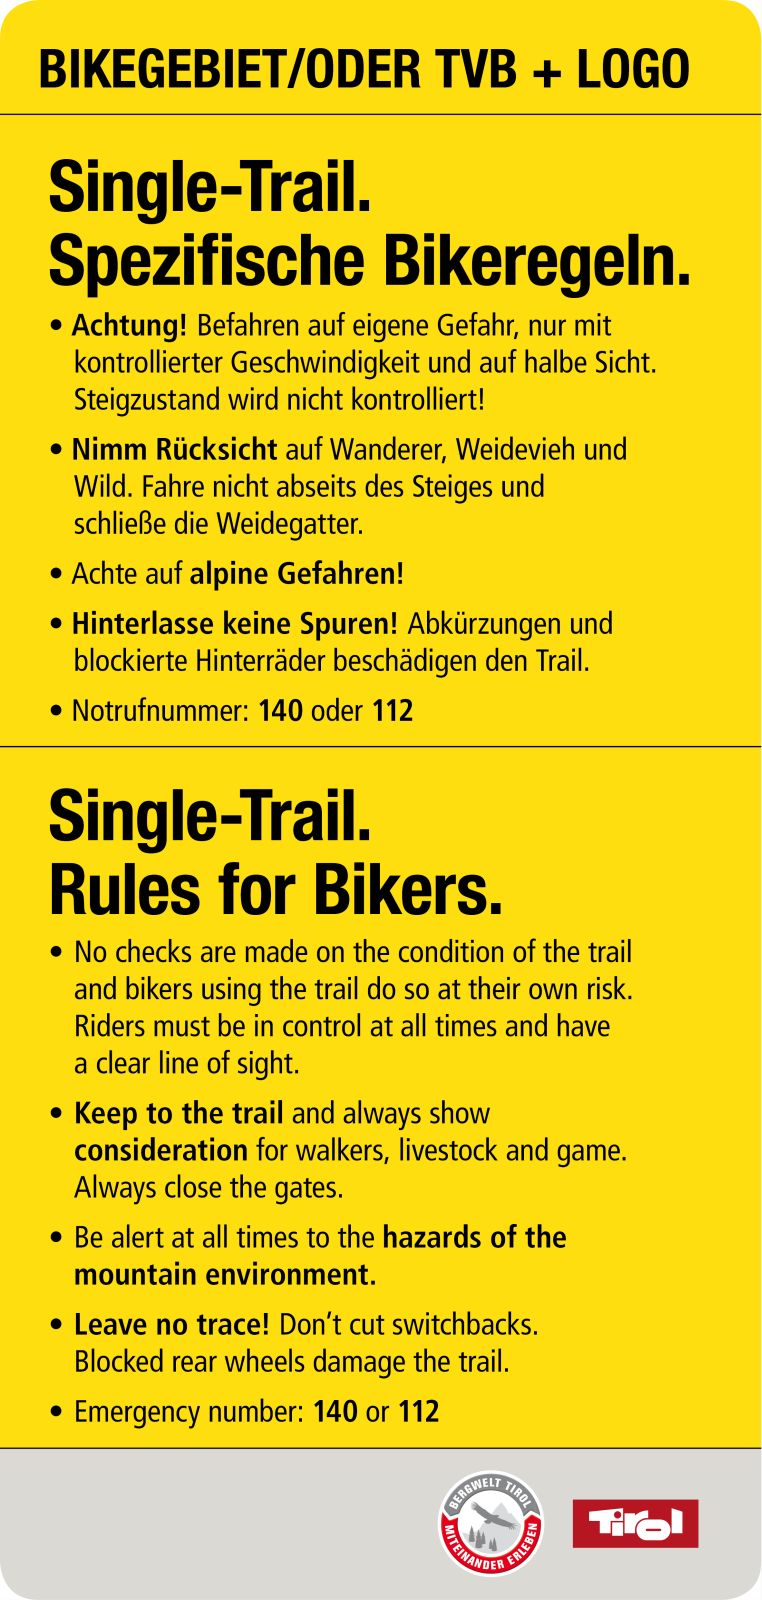 Specific rules of conduct single trail